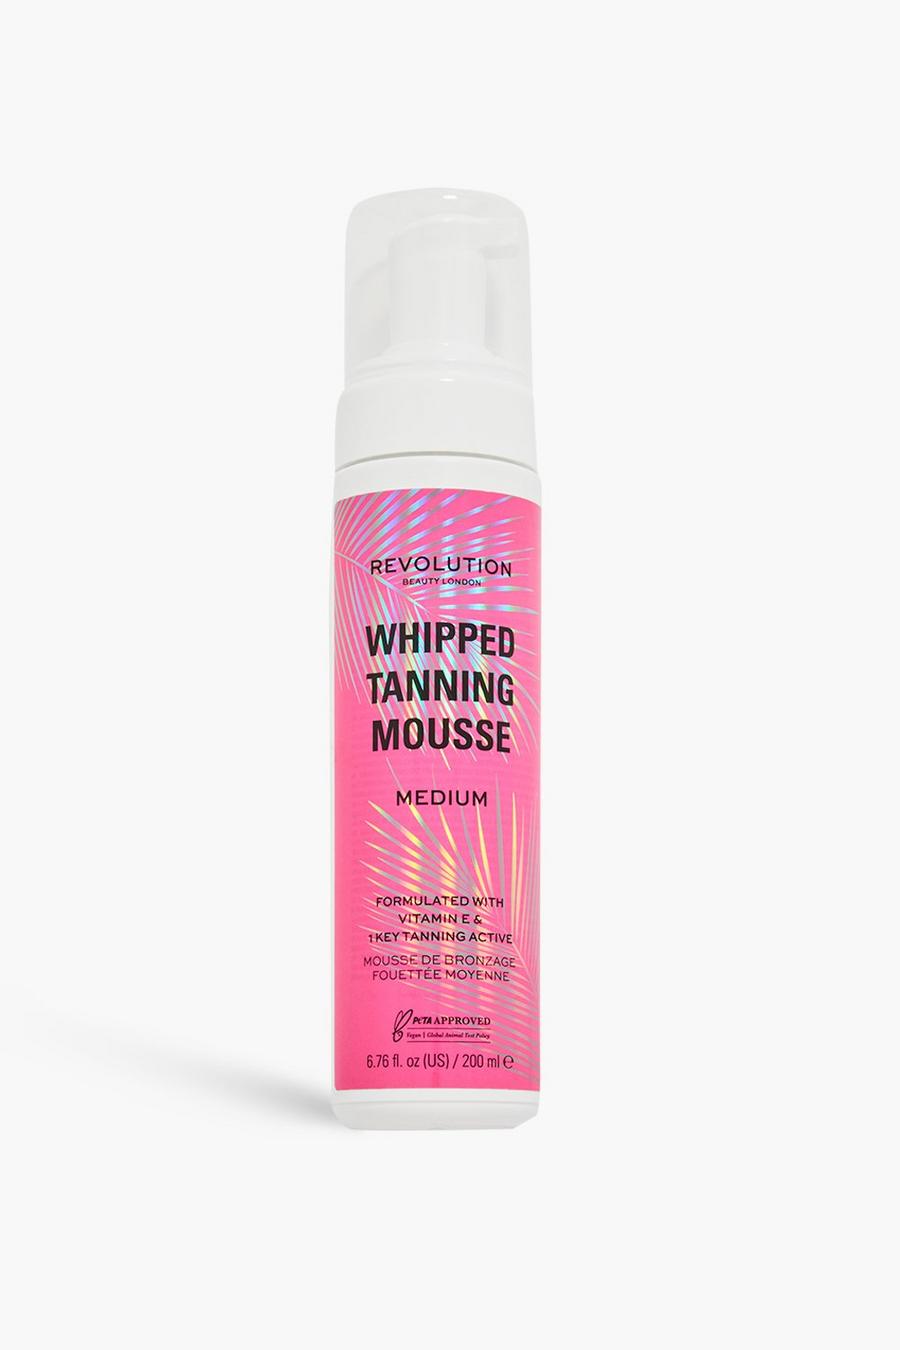 Clear Revolution Beauty Whipped Tanning Mousse Medium